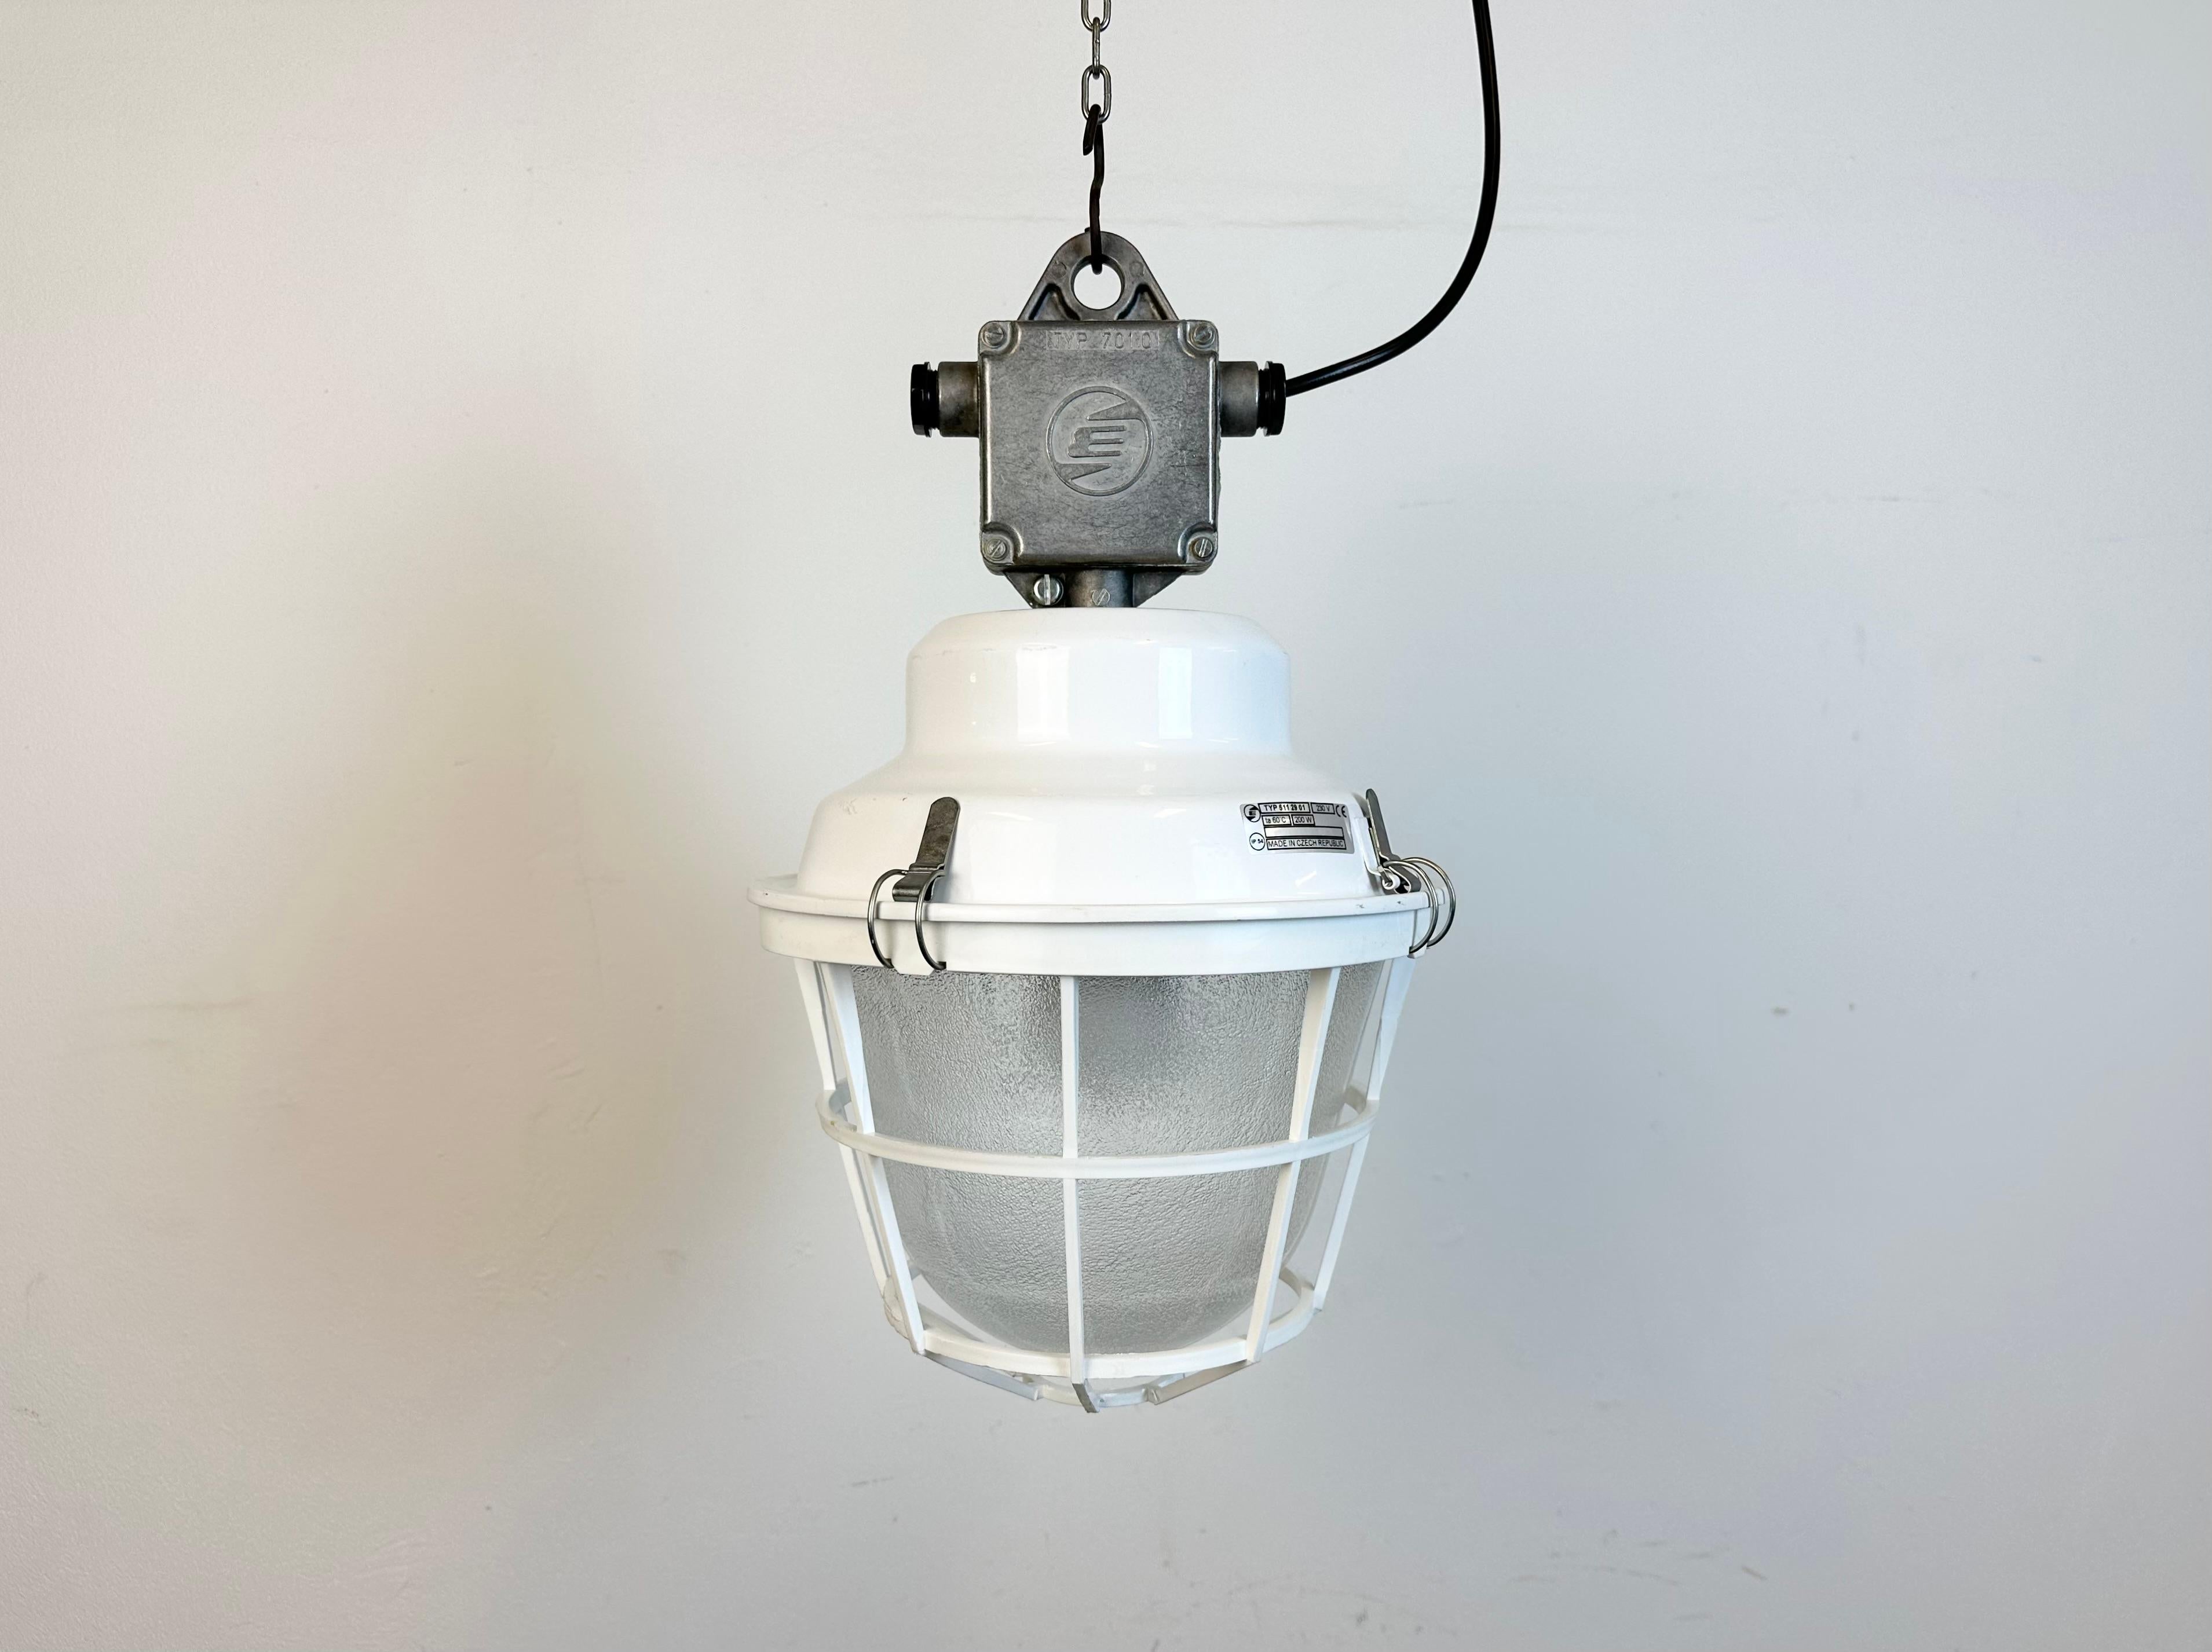 Industrial light made by Elektrosvit in Czech republic during the 1990s. It features a white iron top with cast aluminium box, a frosted glass and a white plastic protective grid.
The porcelain socket requires standard E27/ E26 lightbulbs. New wire.